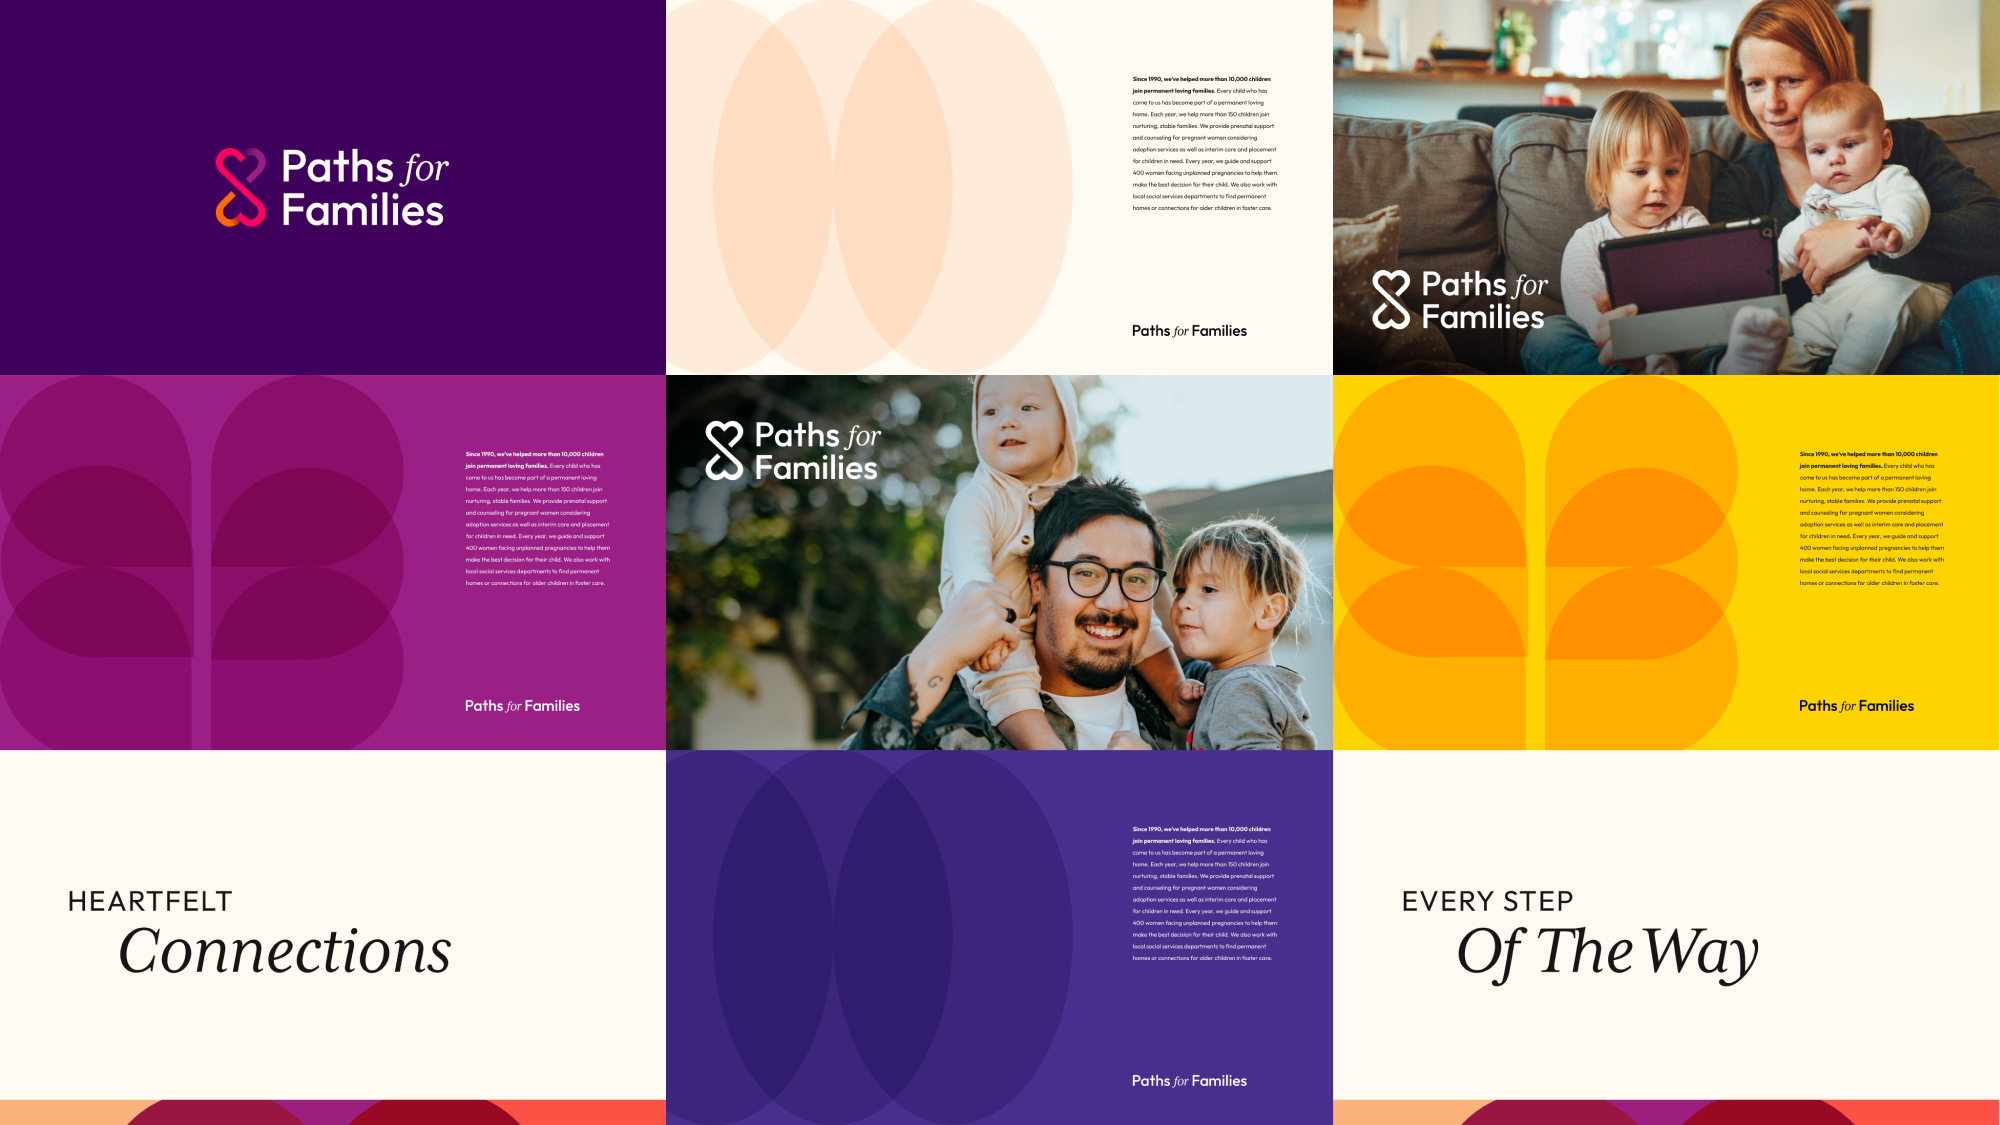 Grid of family-centric images and colorful geometric graphics for the Paths for Families brand.